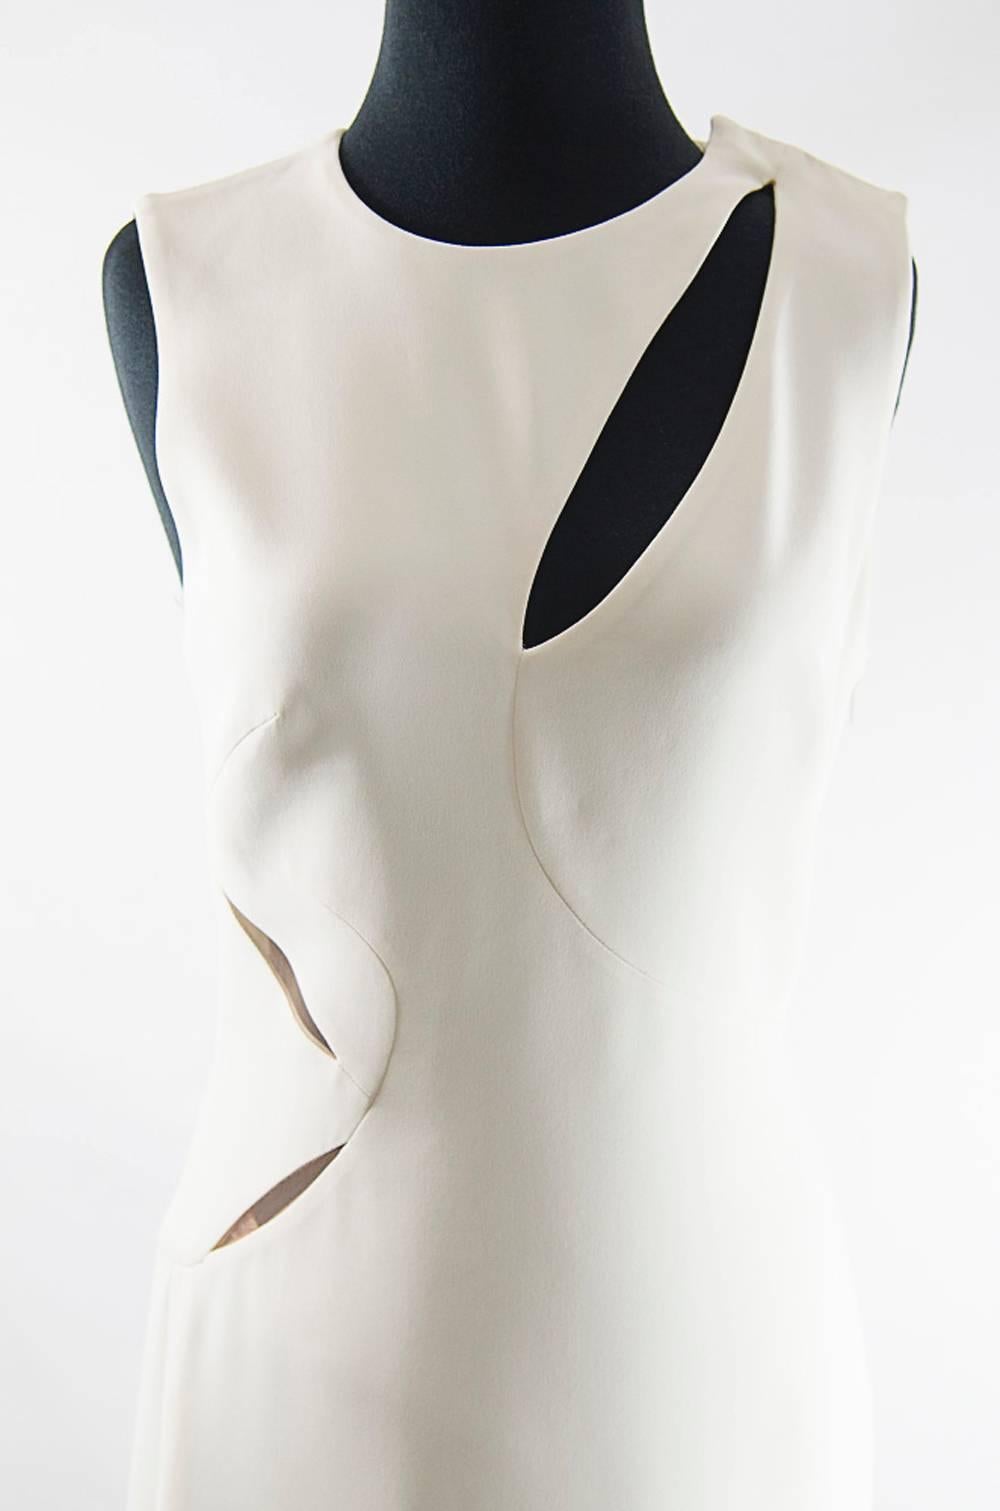 Versace Assymetrical Cutout ivory  gown In Excellent Condition For Sale In New York, NY